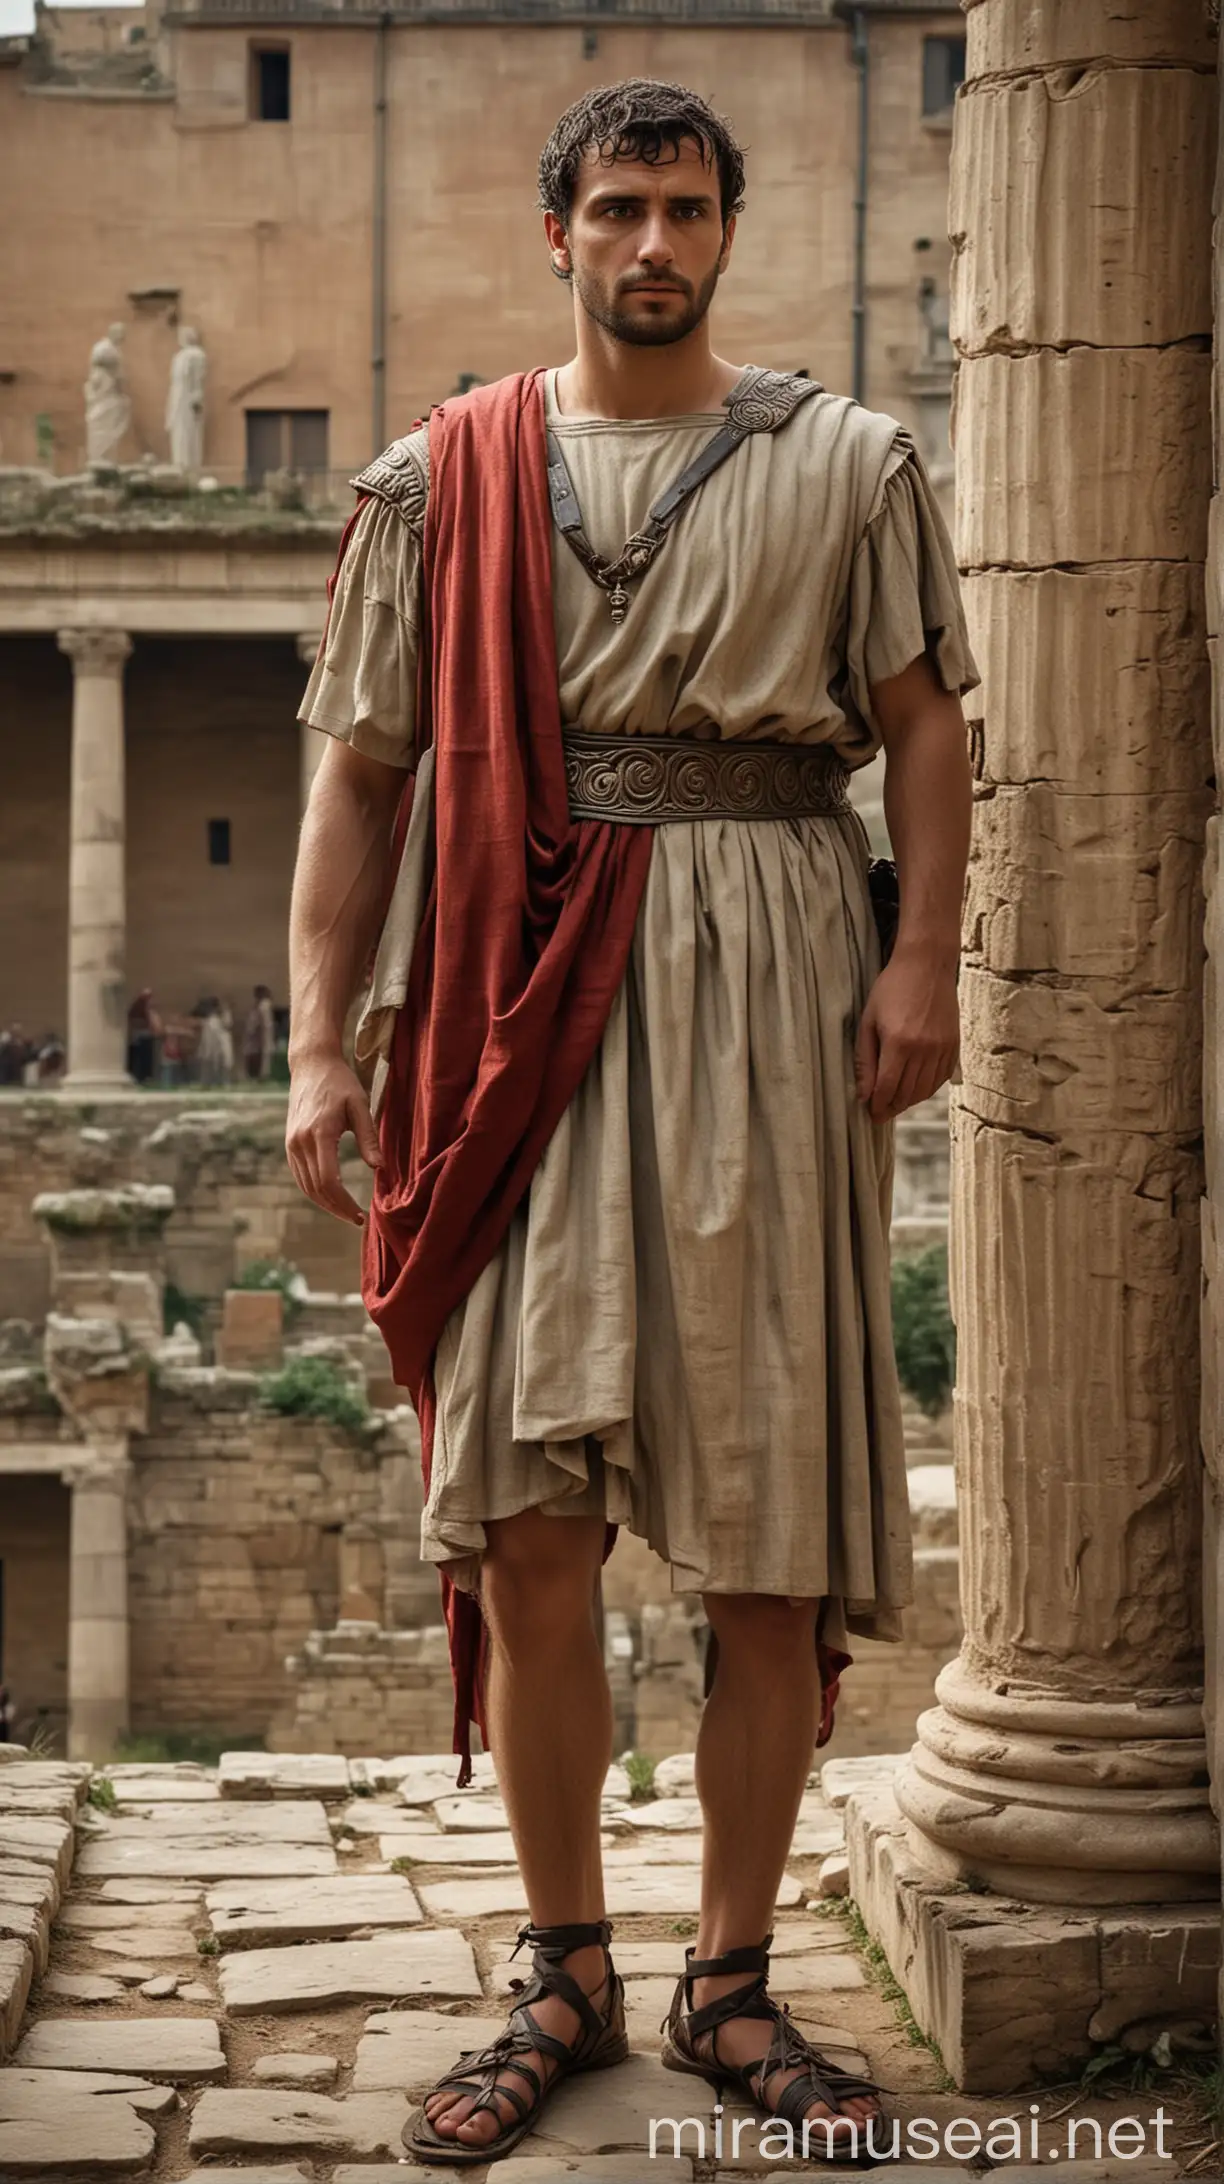 Create an image of a man,  a notable figure in the 1st century AD, dressed in period-appropriate attire, the man standing in an ancient setting reflective of the time. The background should depict architecture and elements indicative of the early Roman era." In ancient world 